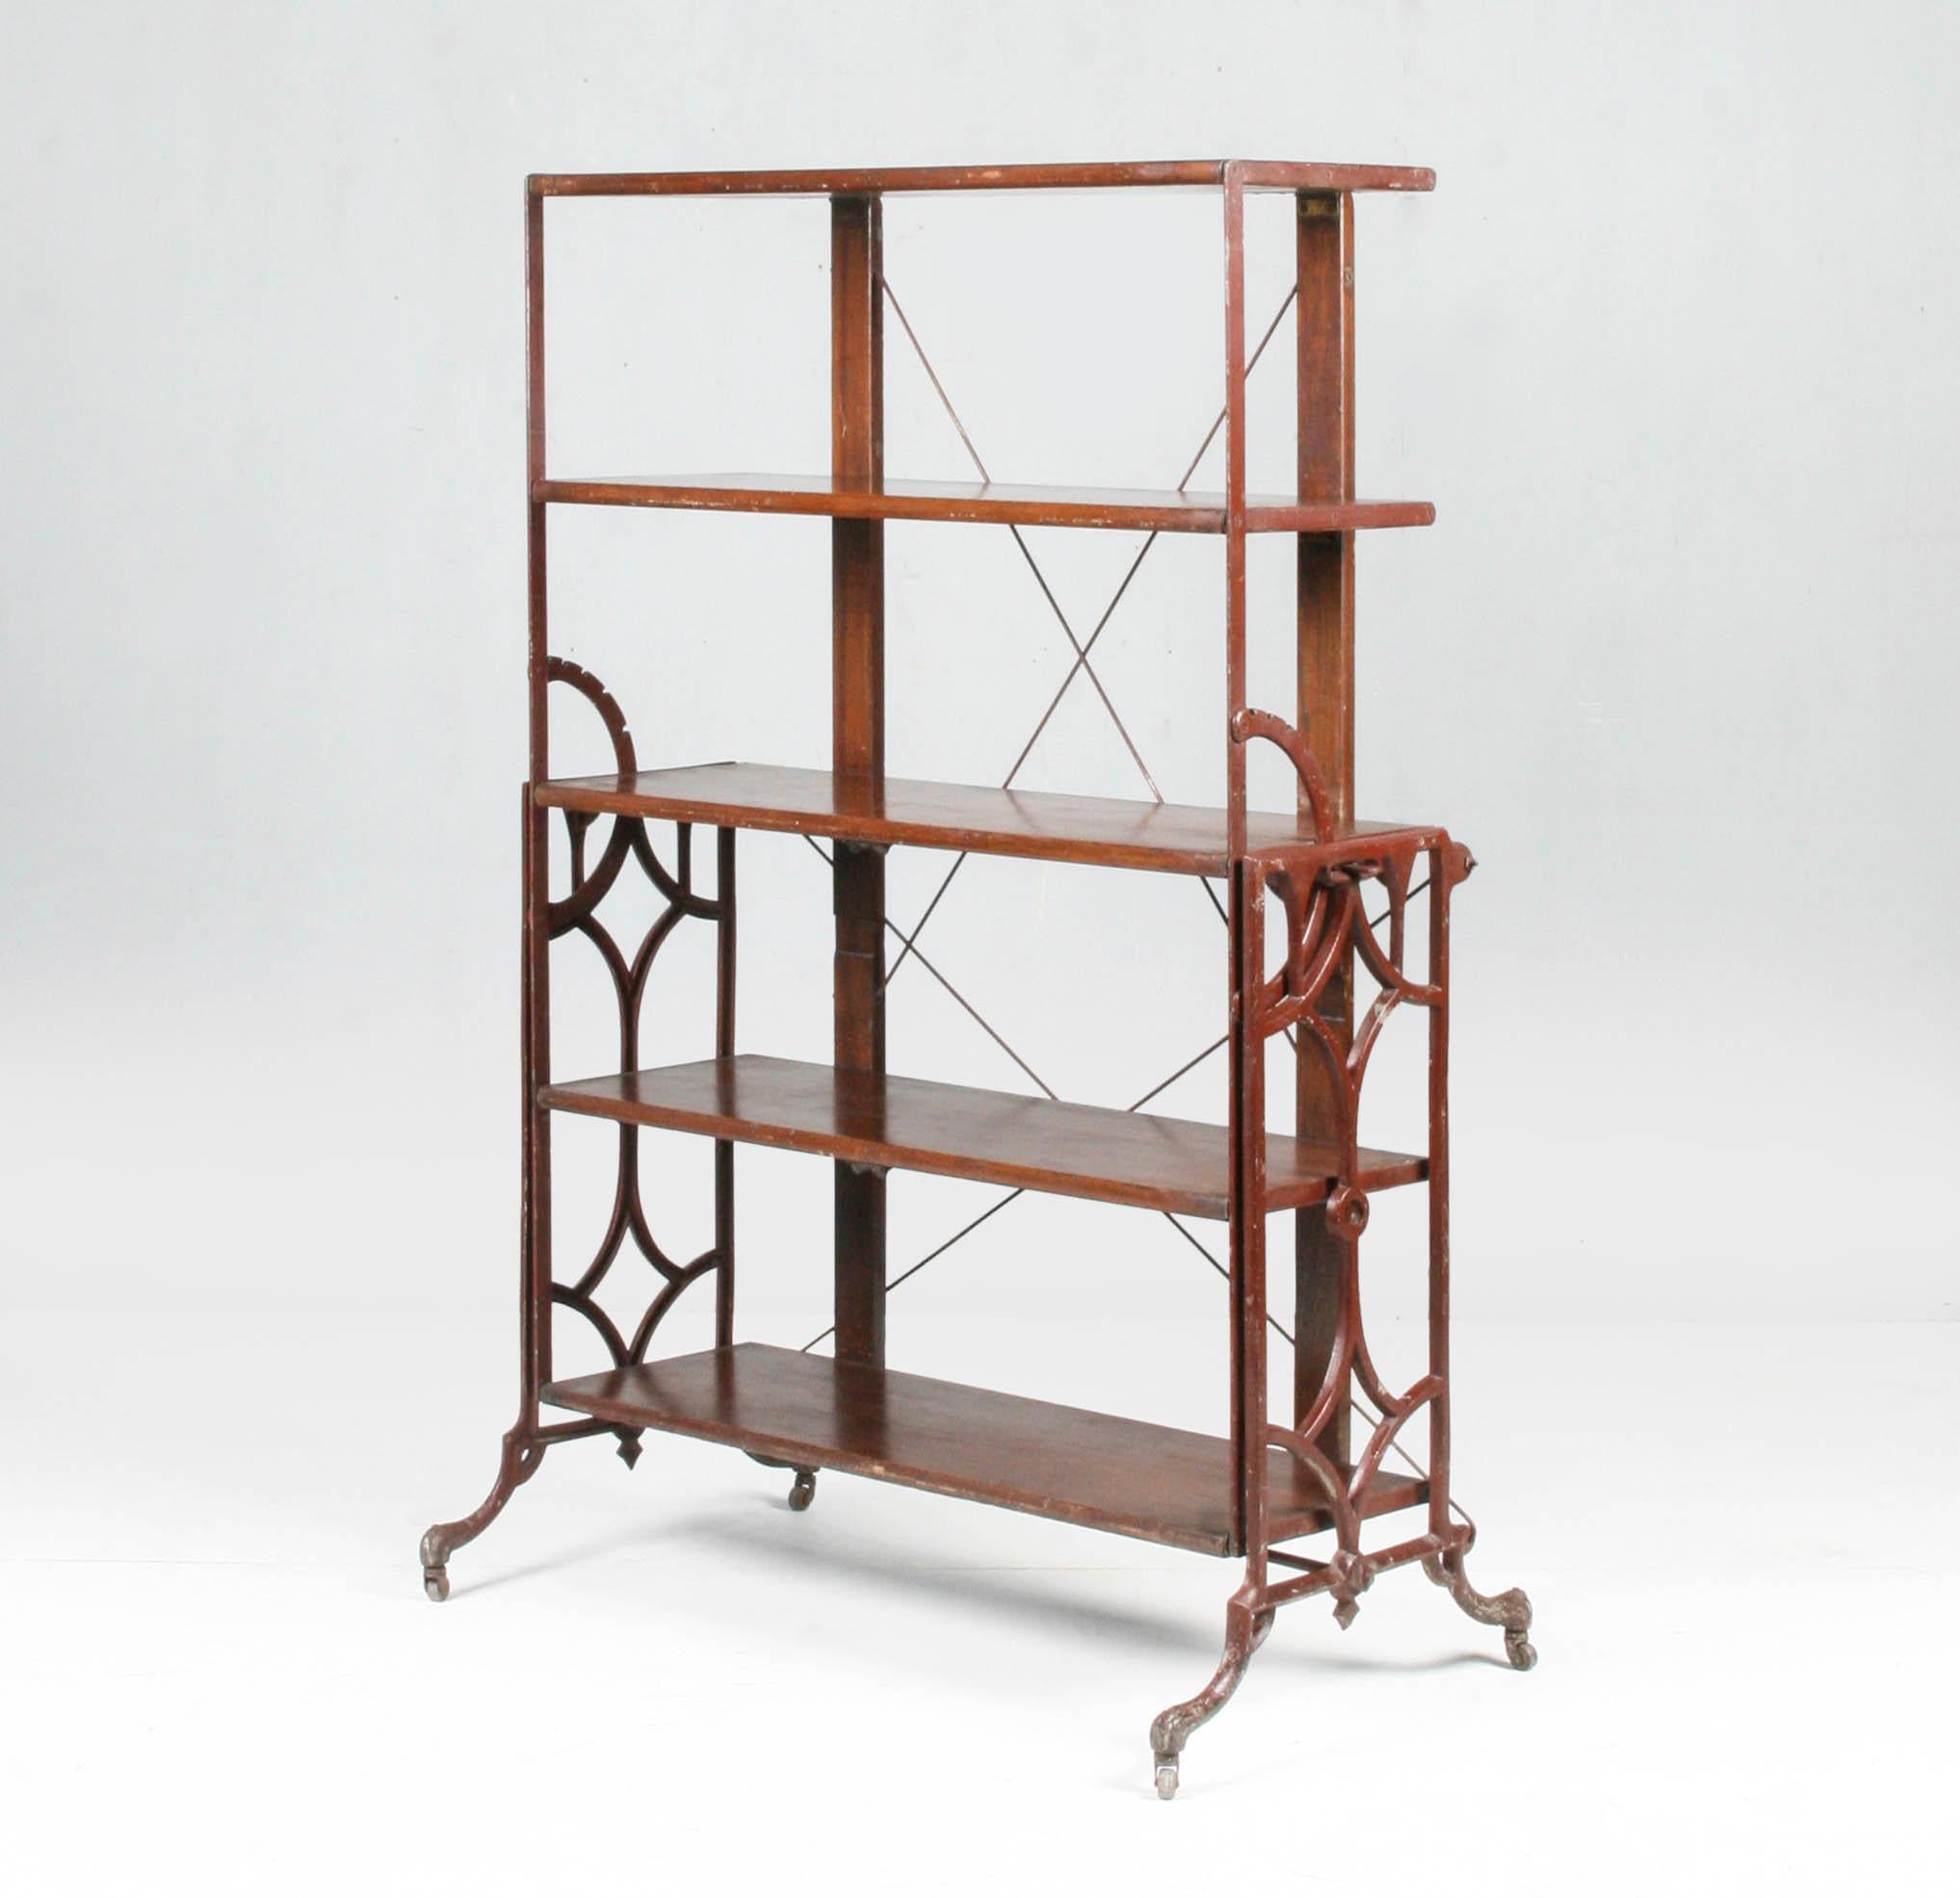 Antique folding shelf / table. Cast iron frame and oak shelves. Patented by Boeckh Brothers. This shelf / table were used to prepare and arrange the brushes and pigments.

Origin:
Canada, 1900-1910

Dimensions:
Shelf position 145 x 96 x